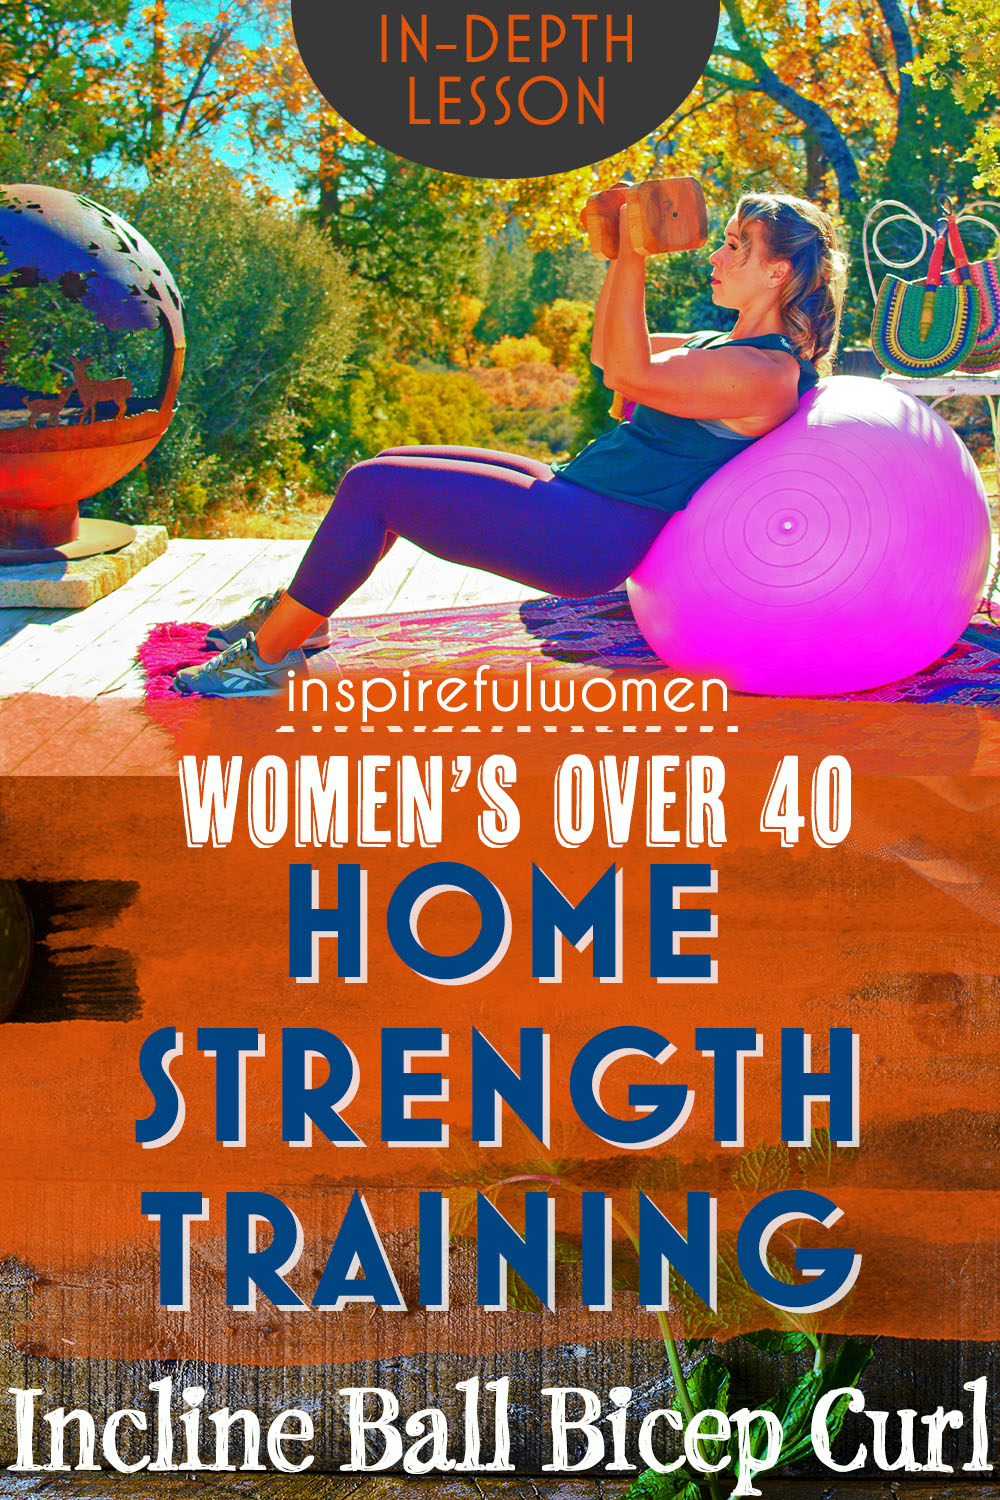 supine-incline-bicep-curl-alternative-dumbbell-stability-ball-upper-arm-toning-exercise-women-over-40